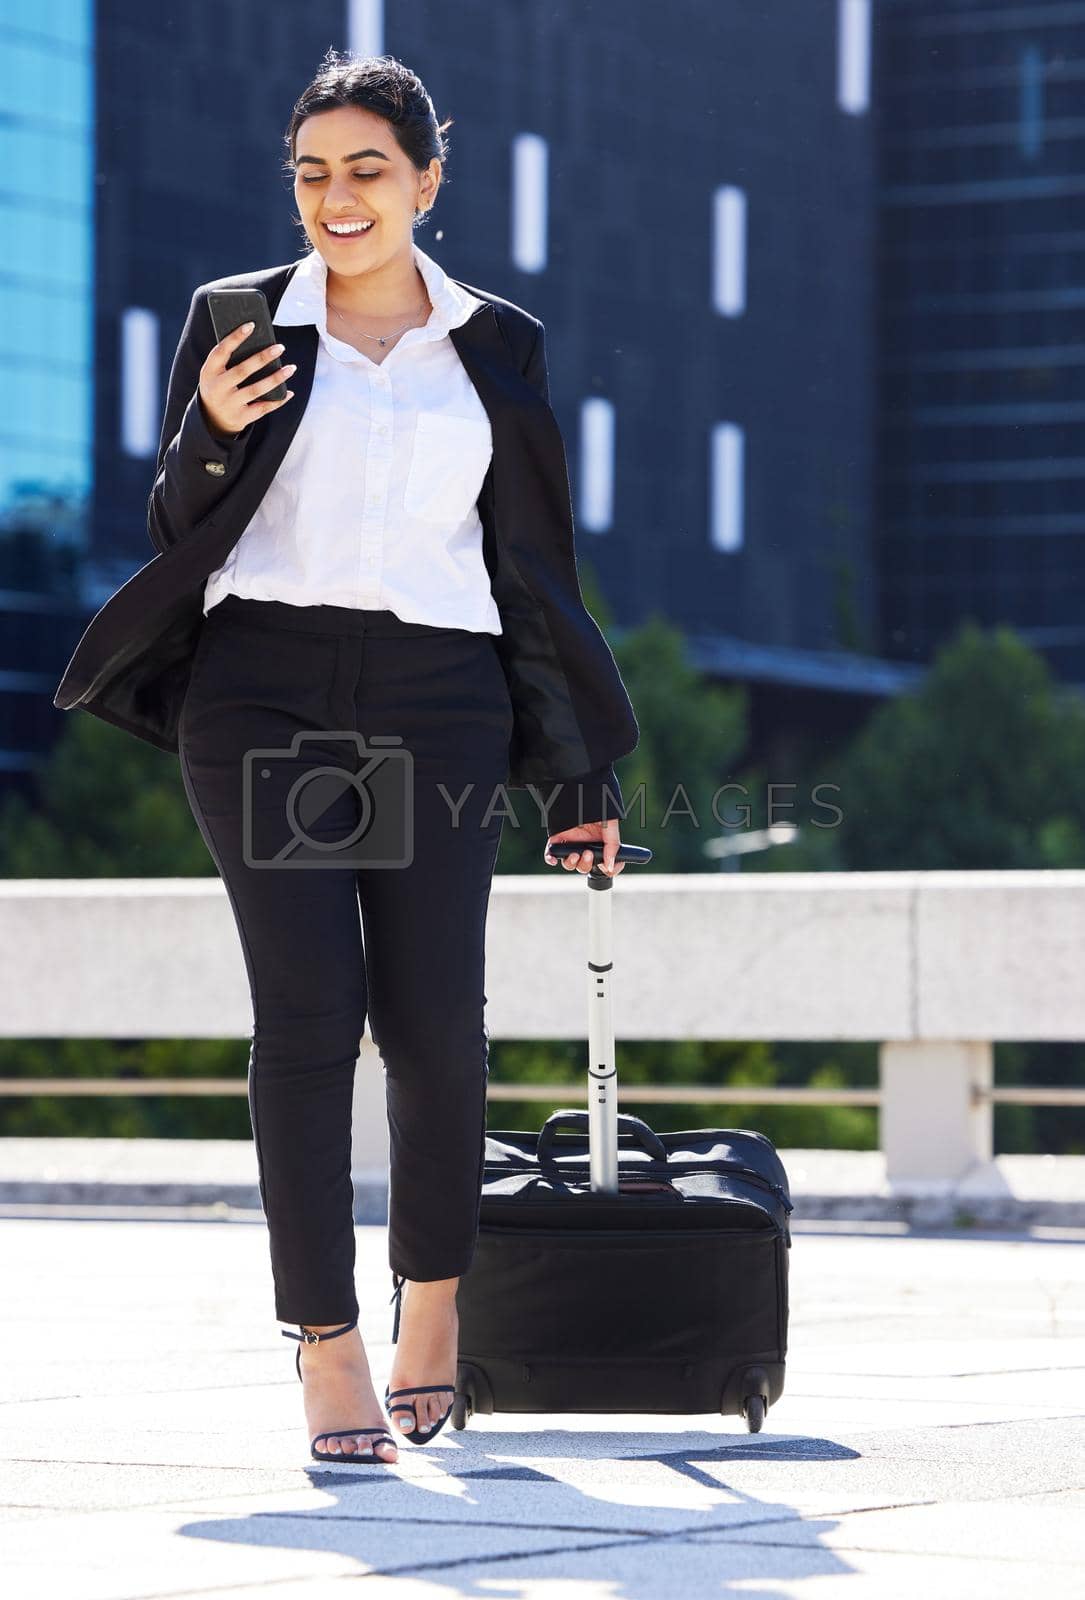 Business woman, travel with luggage and phone for communication with work, internet or web search. Corporate employee going to airport to catch plane for company tradeshow, conference or workshop.